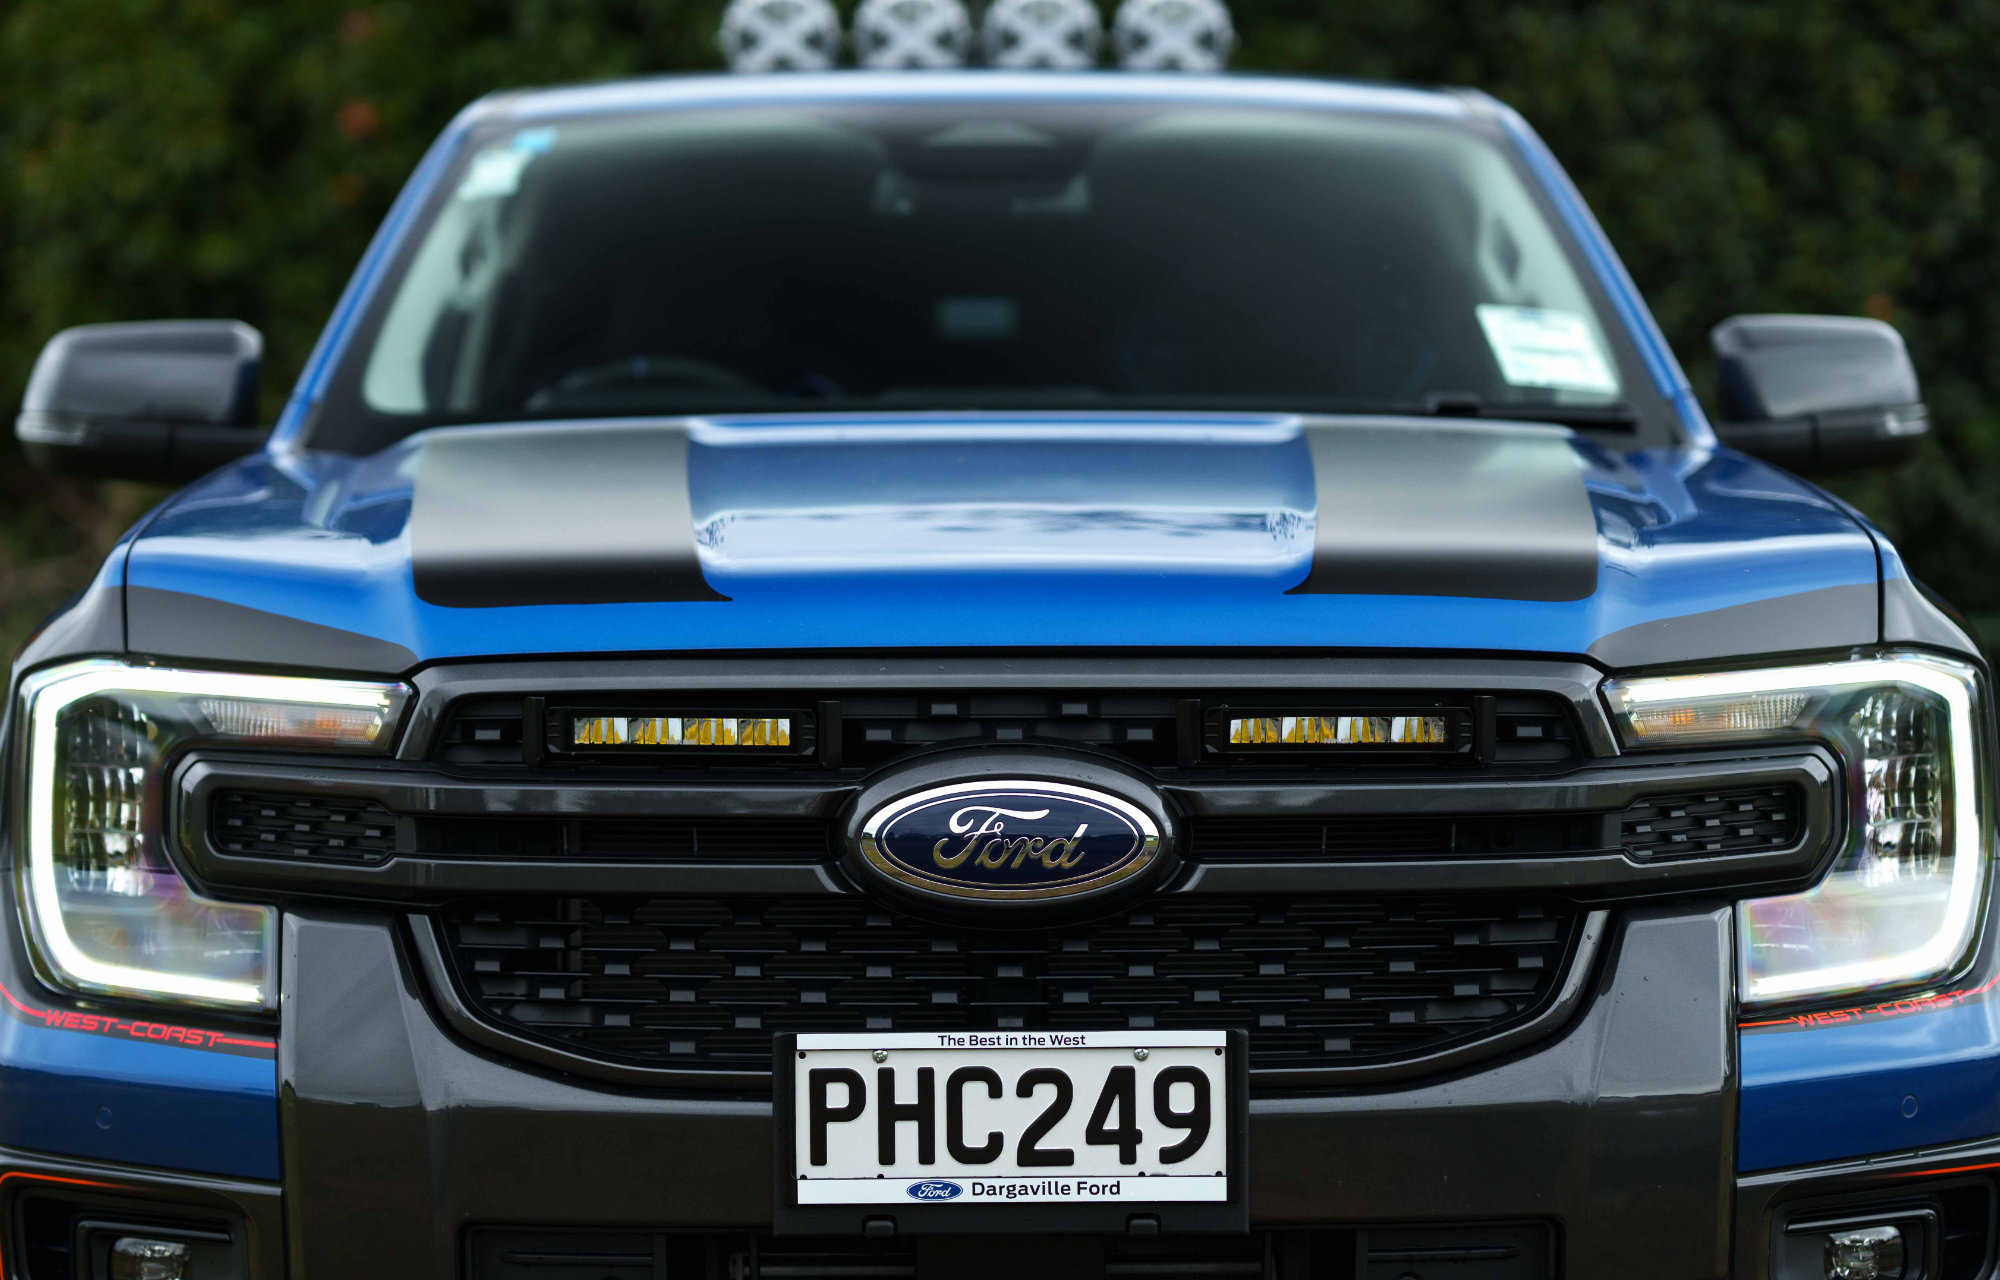 West Coast Edition Ford Ranger Grille